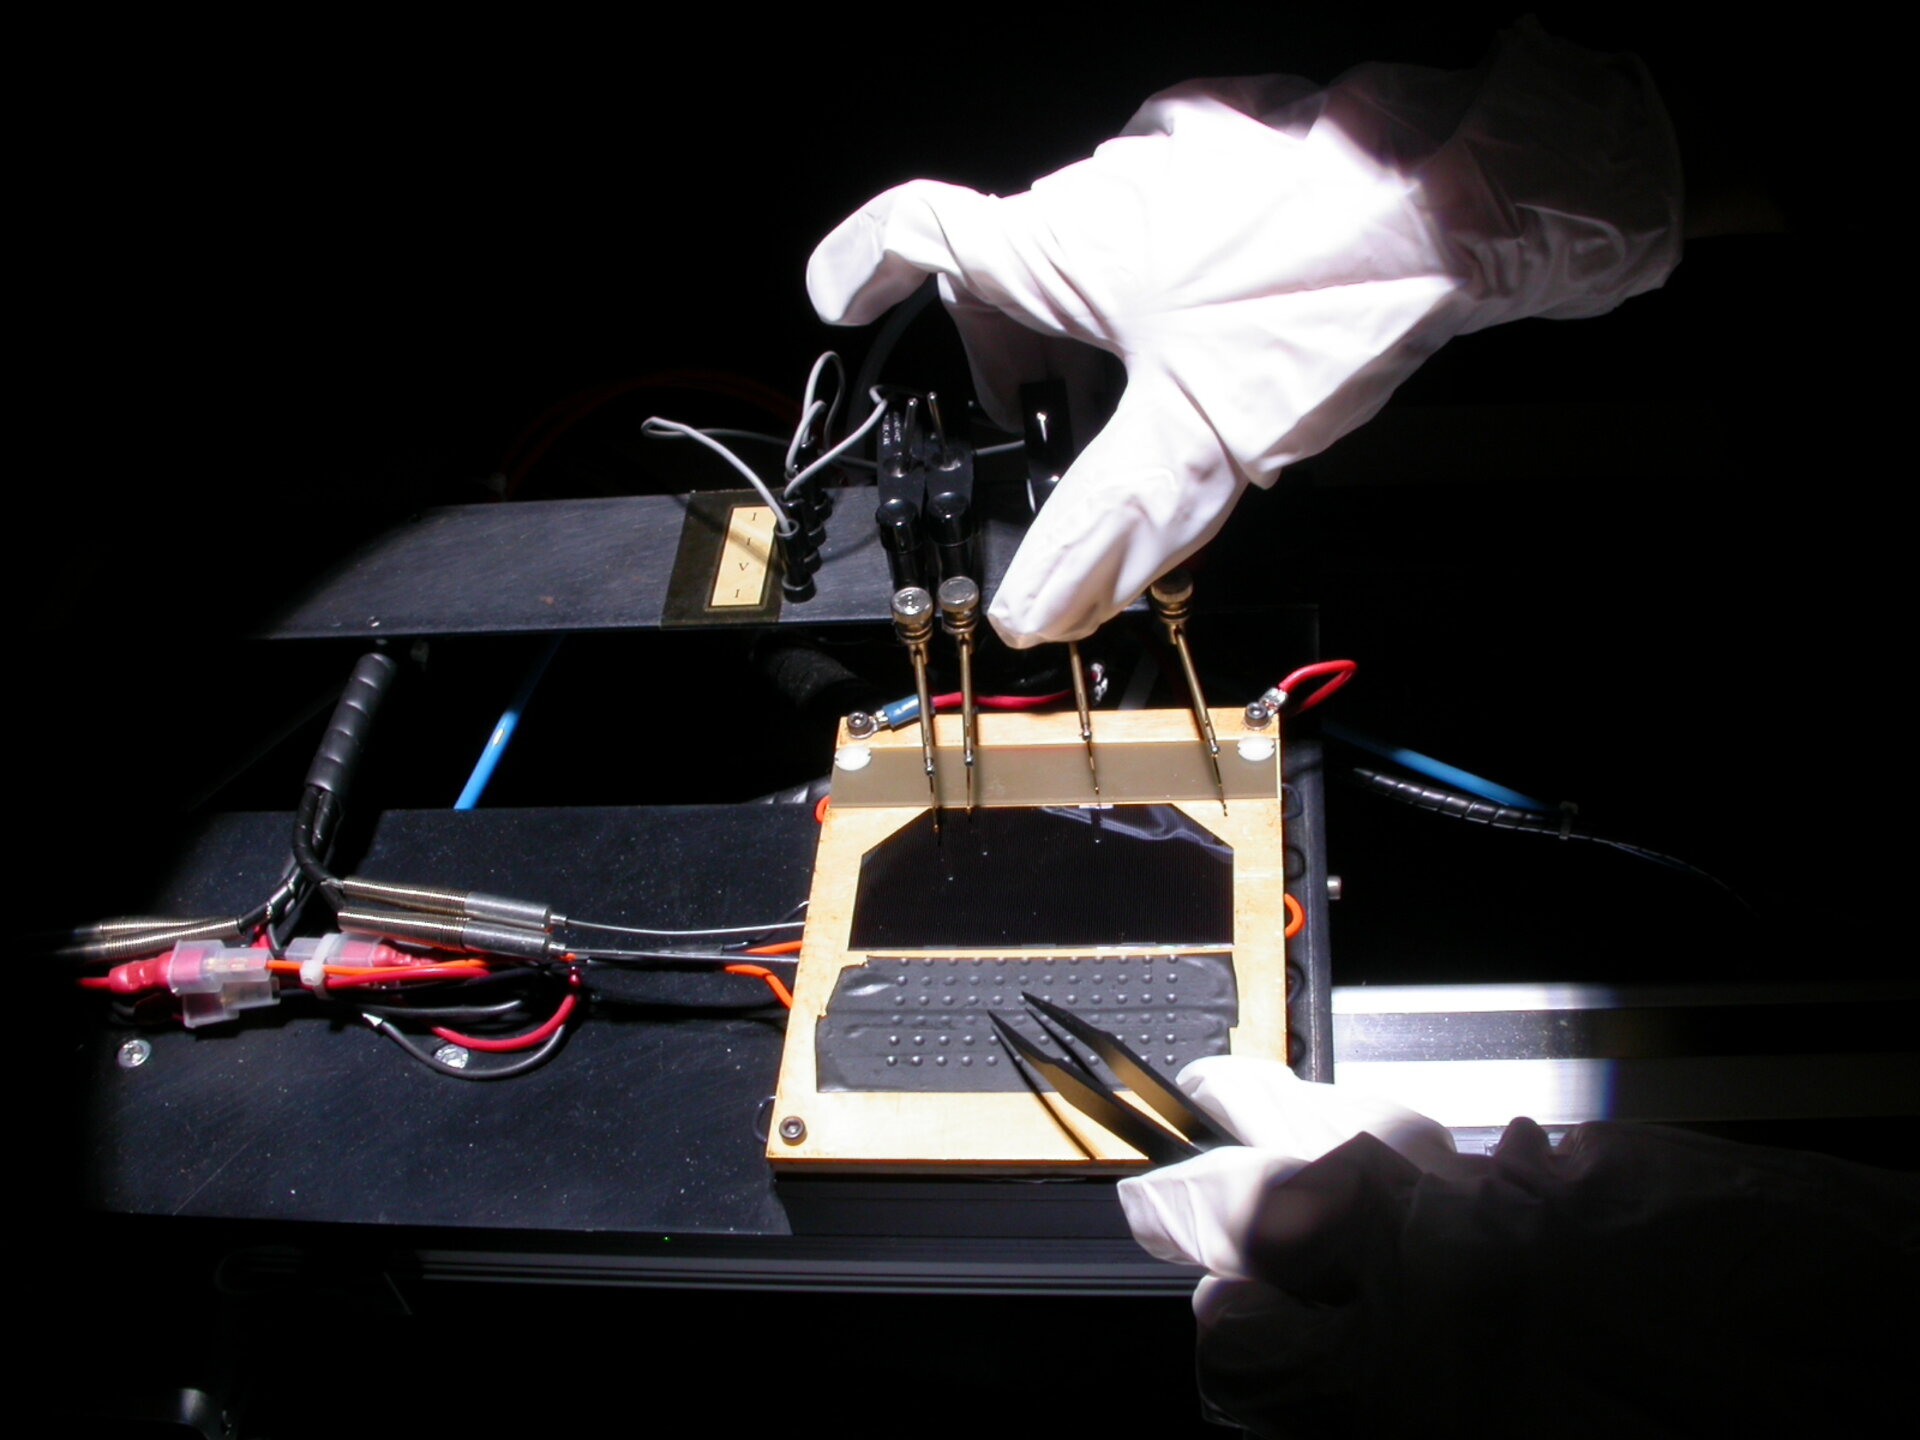 Preparing to test a standard triple junction solar cell